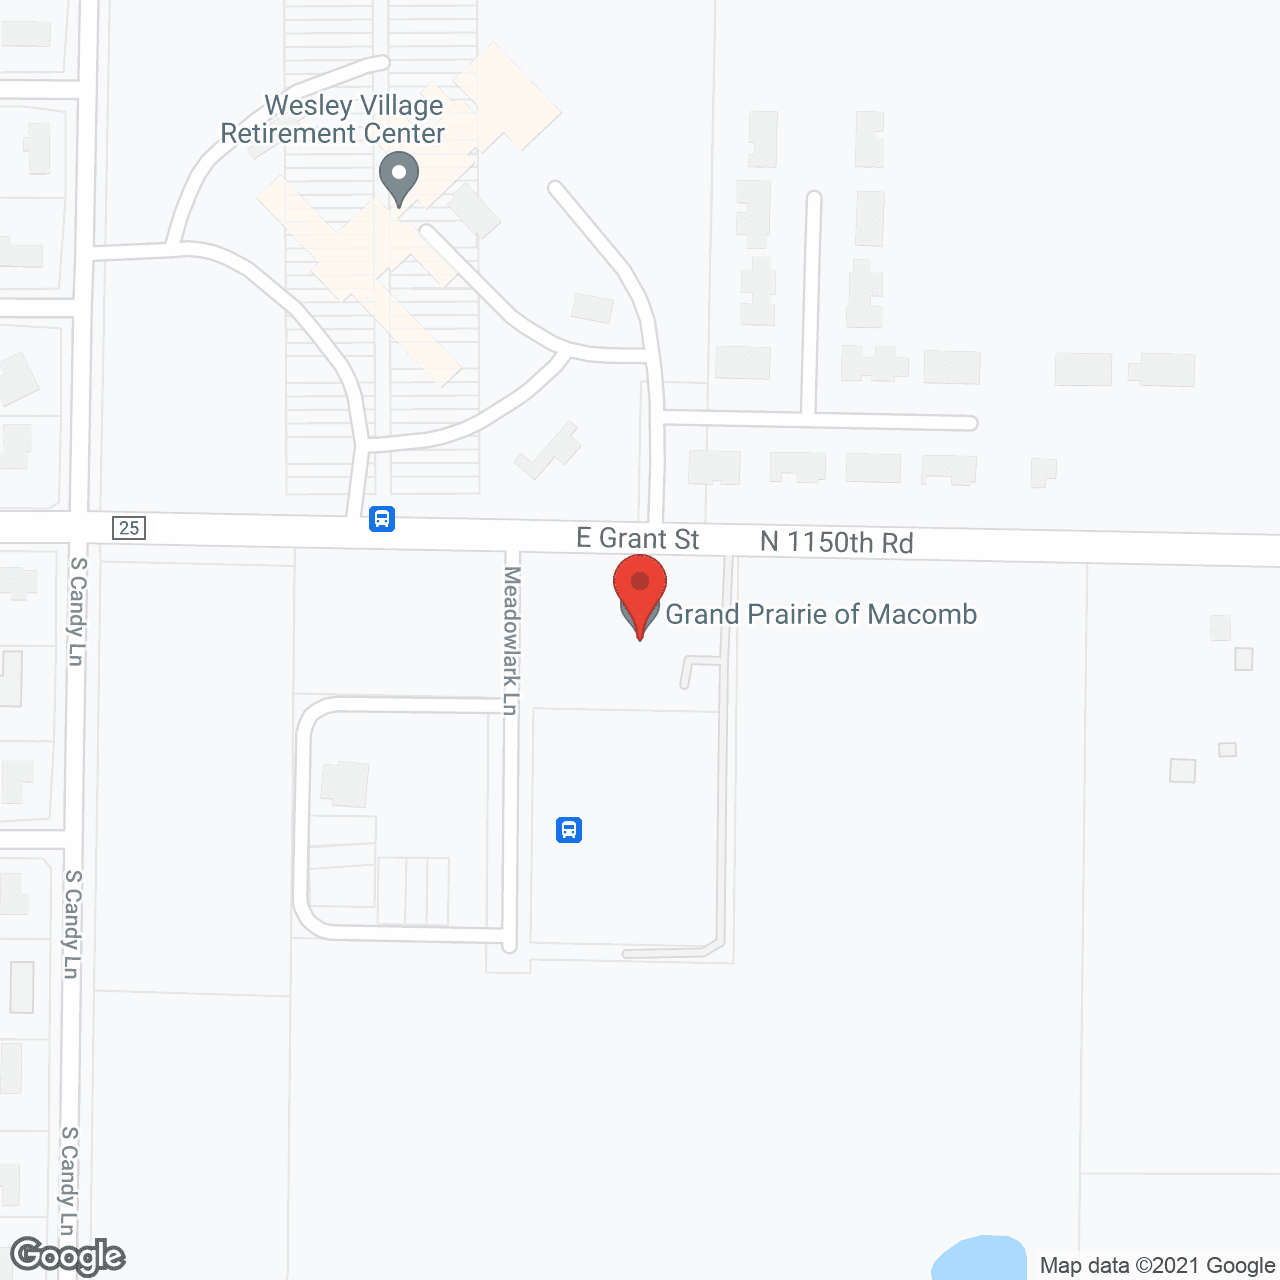 Grand Prairie Assisted Living in google map